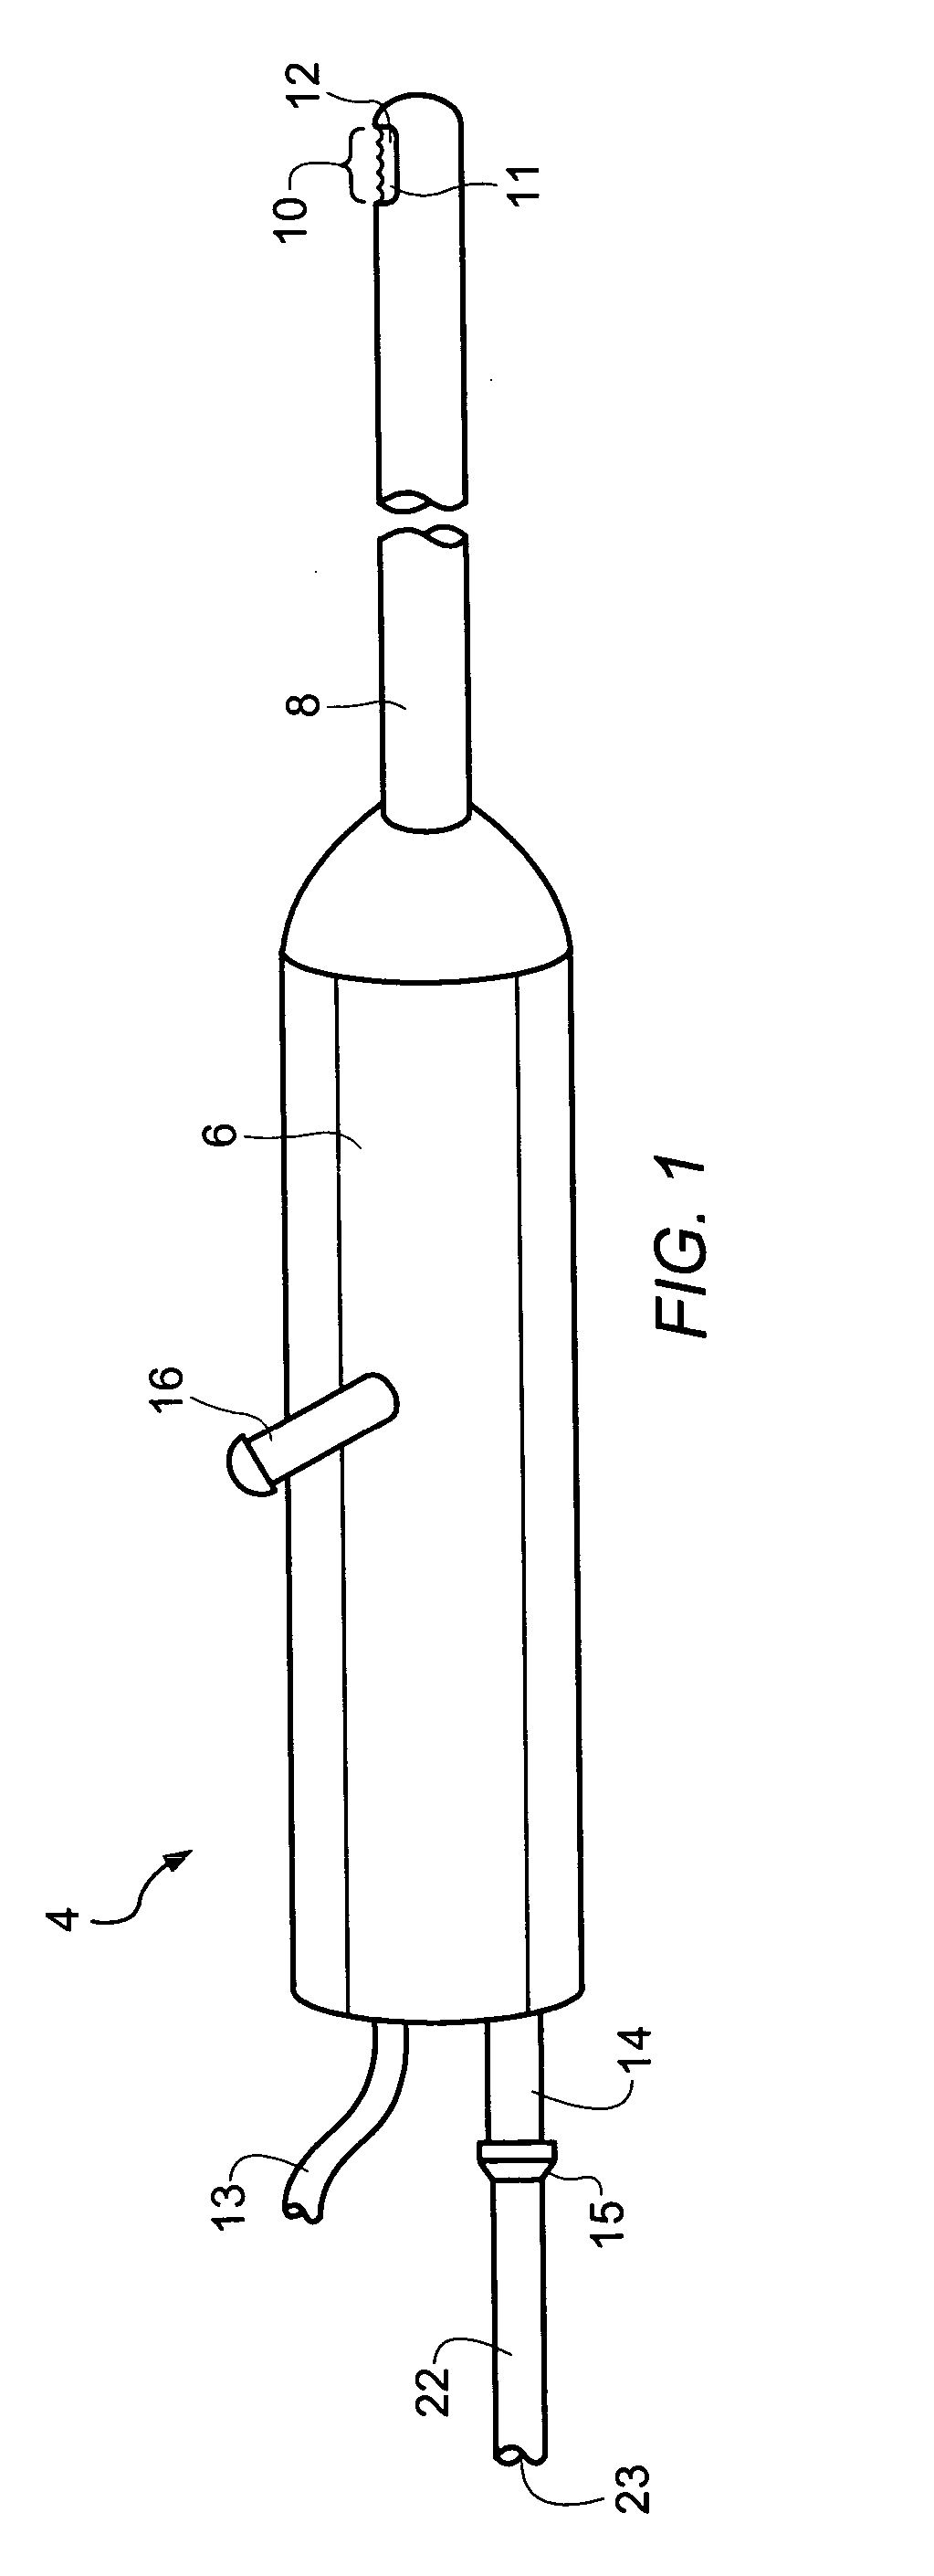 Apparatus and methods for clearing obstructions from surgical cutting instruments